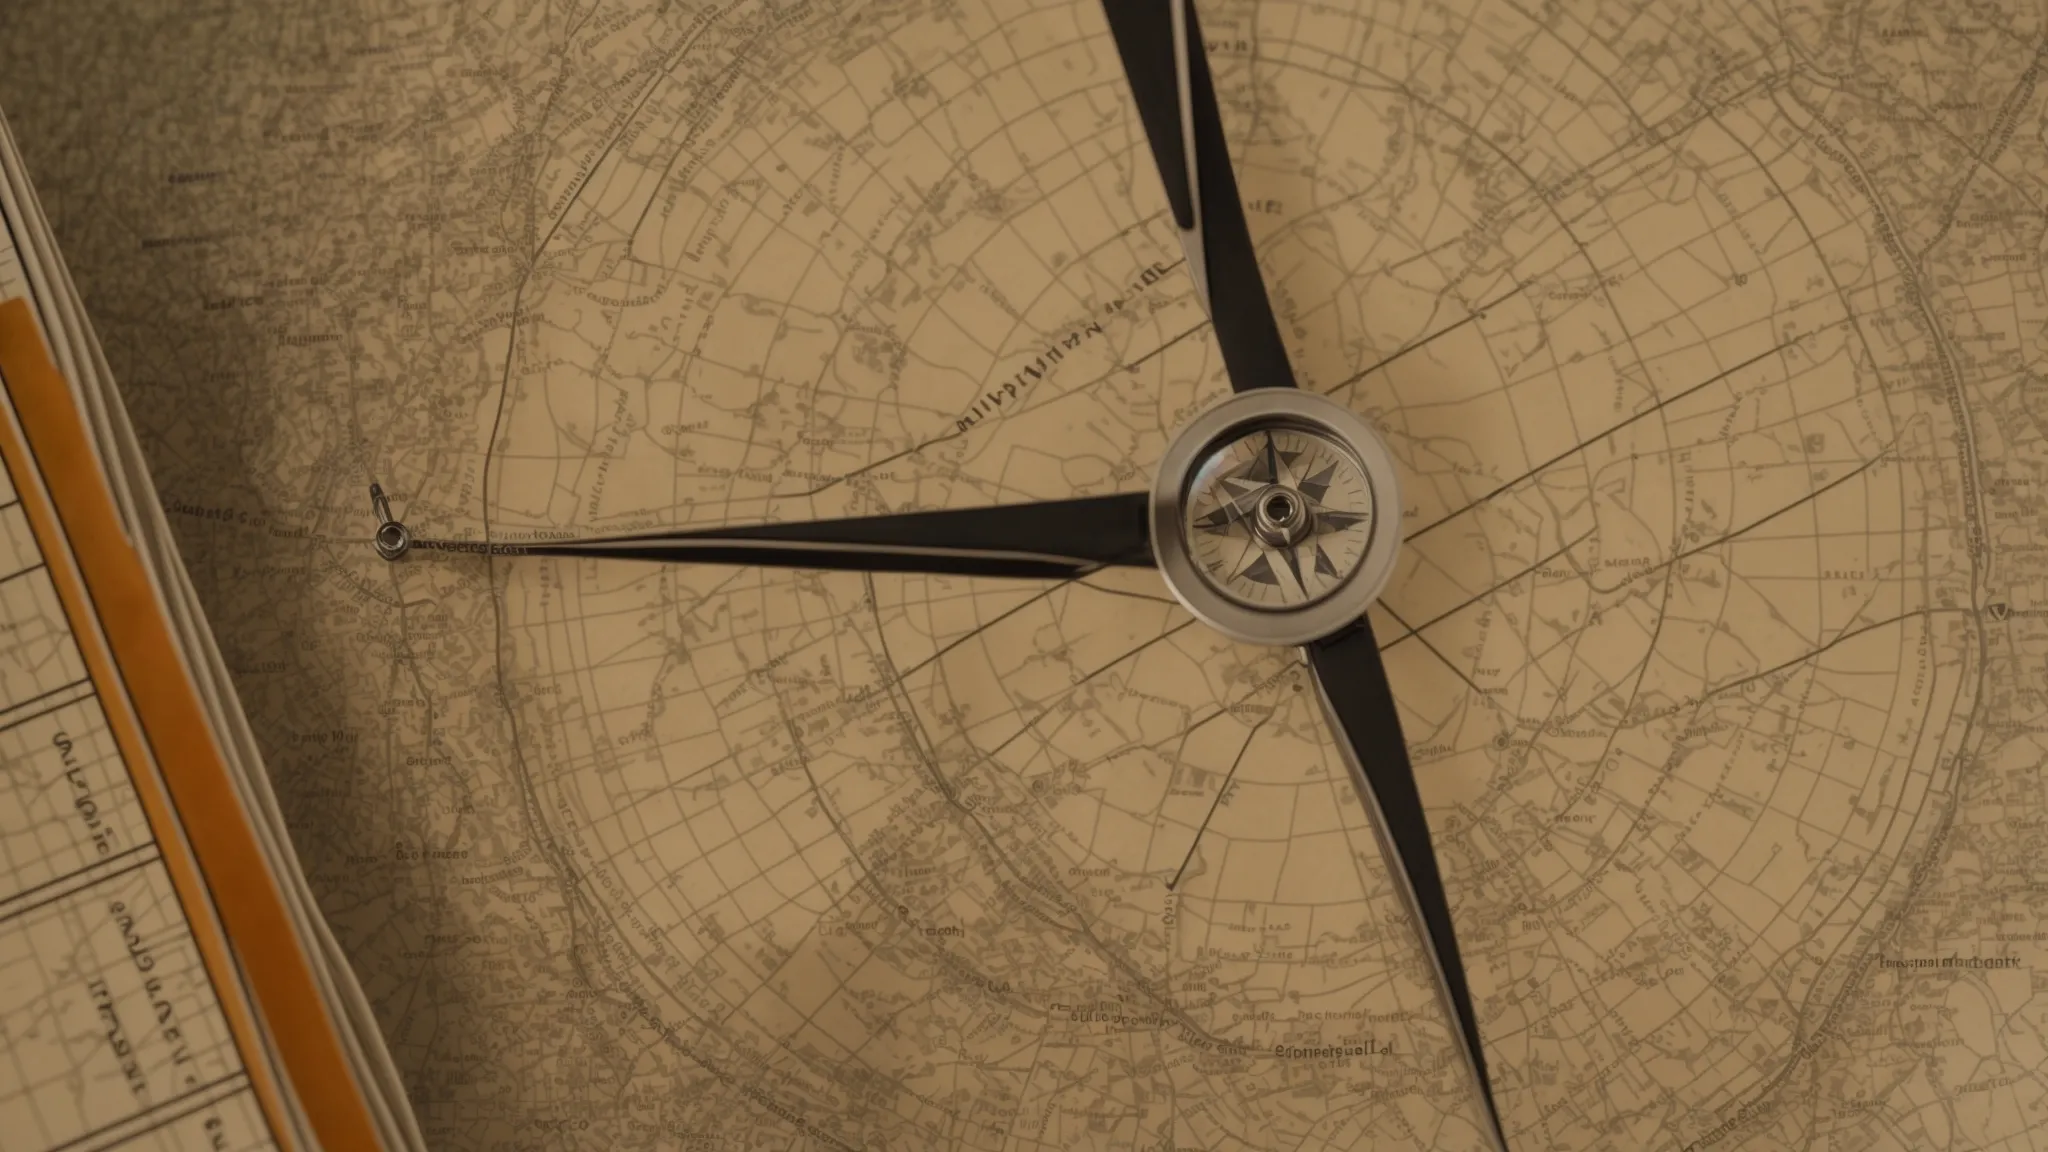 a compass atop a map, illustrating the concept of navigation through complexities.